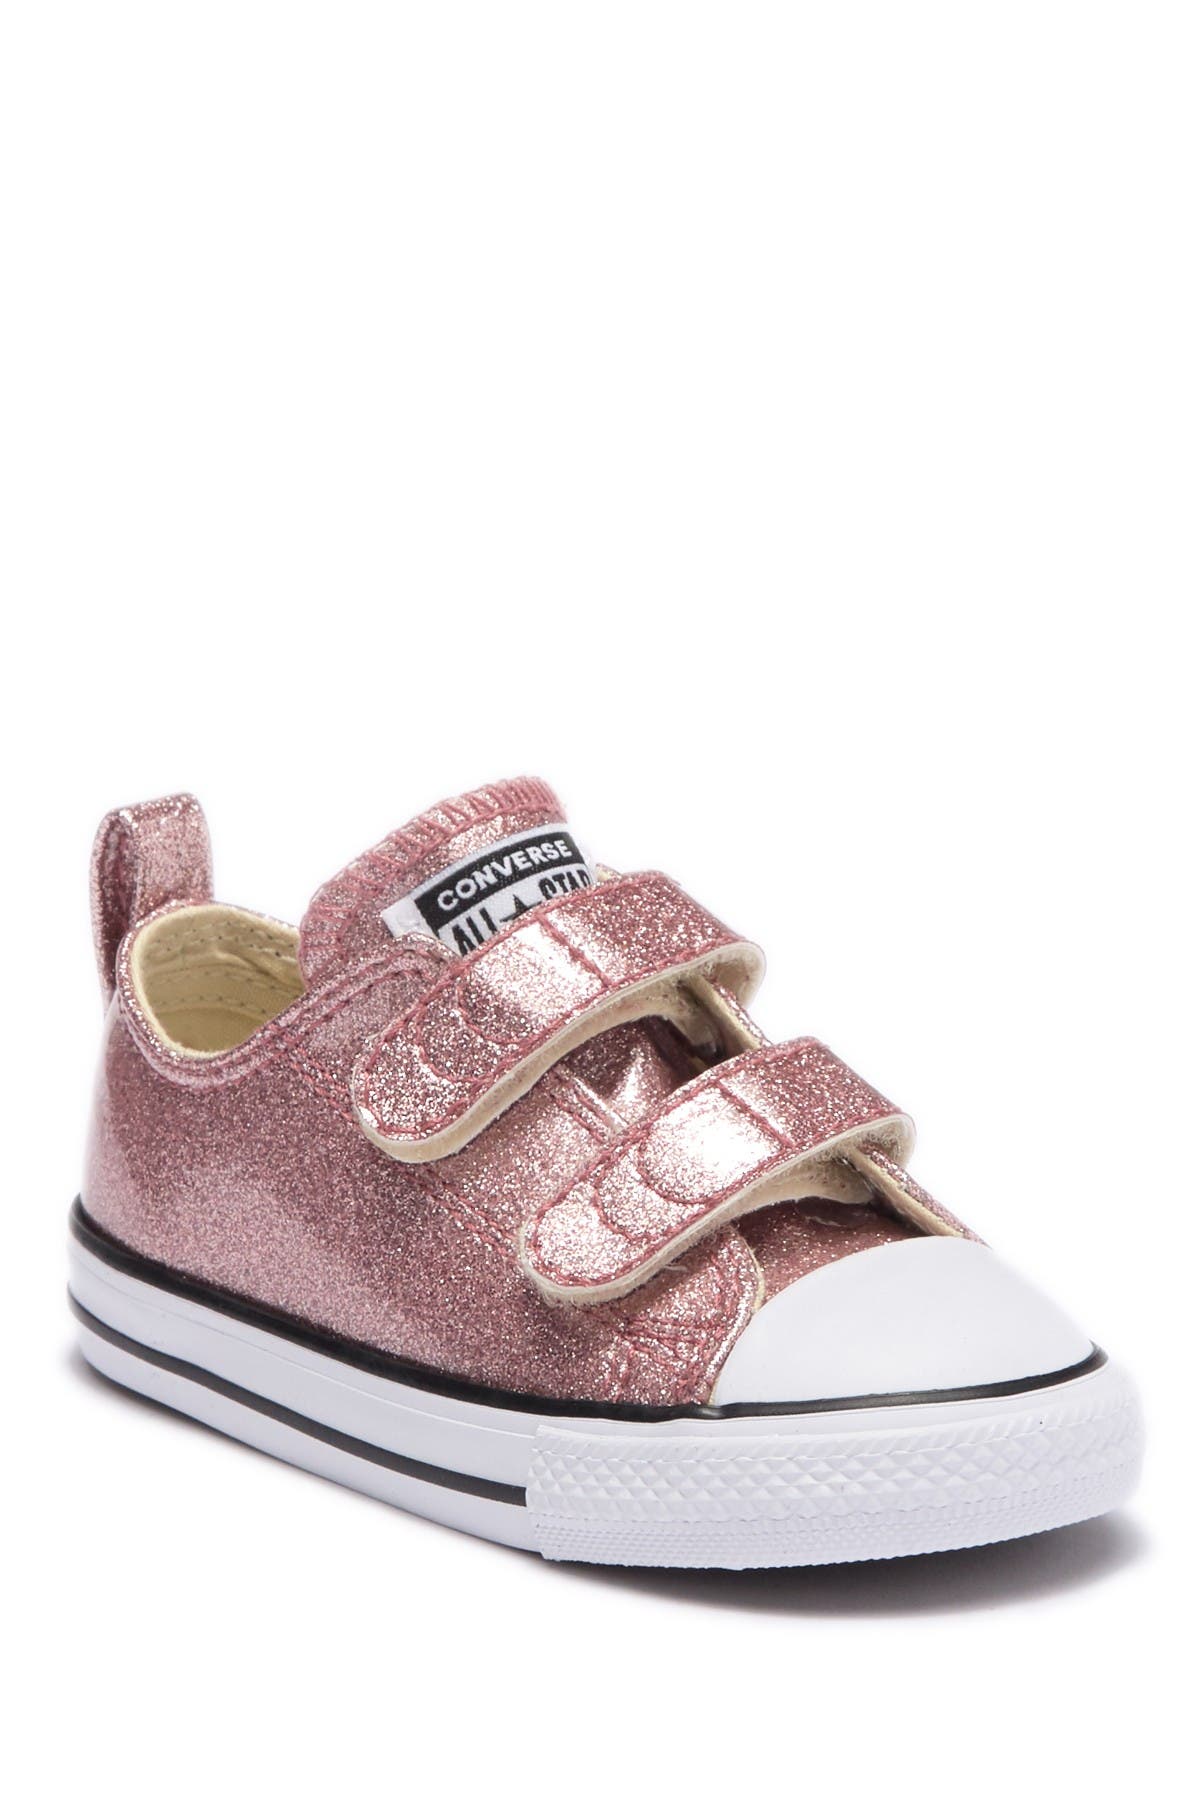 all star converse rose gold